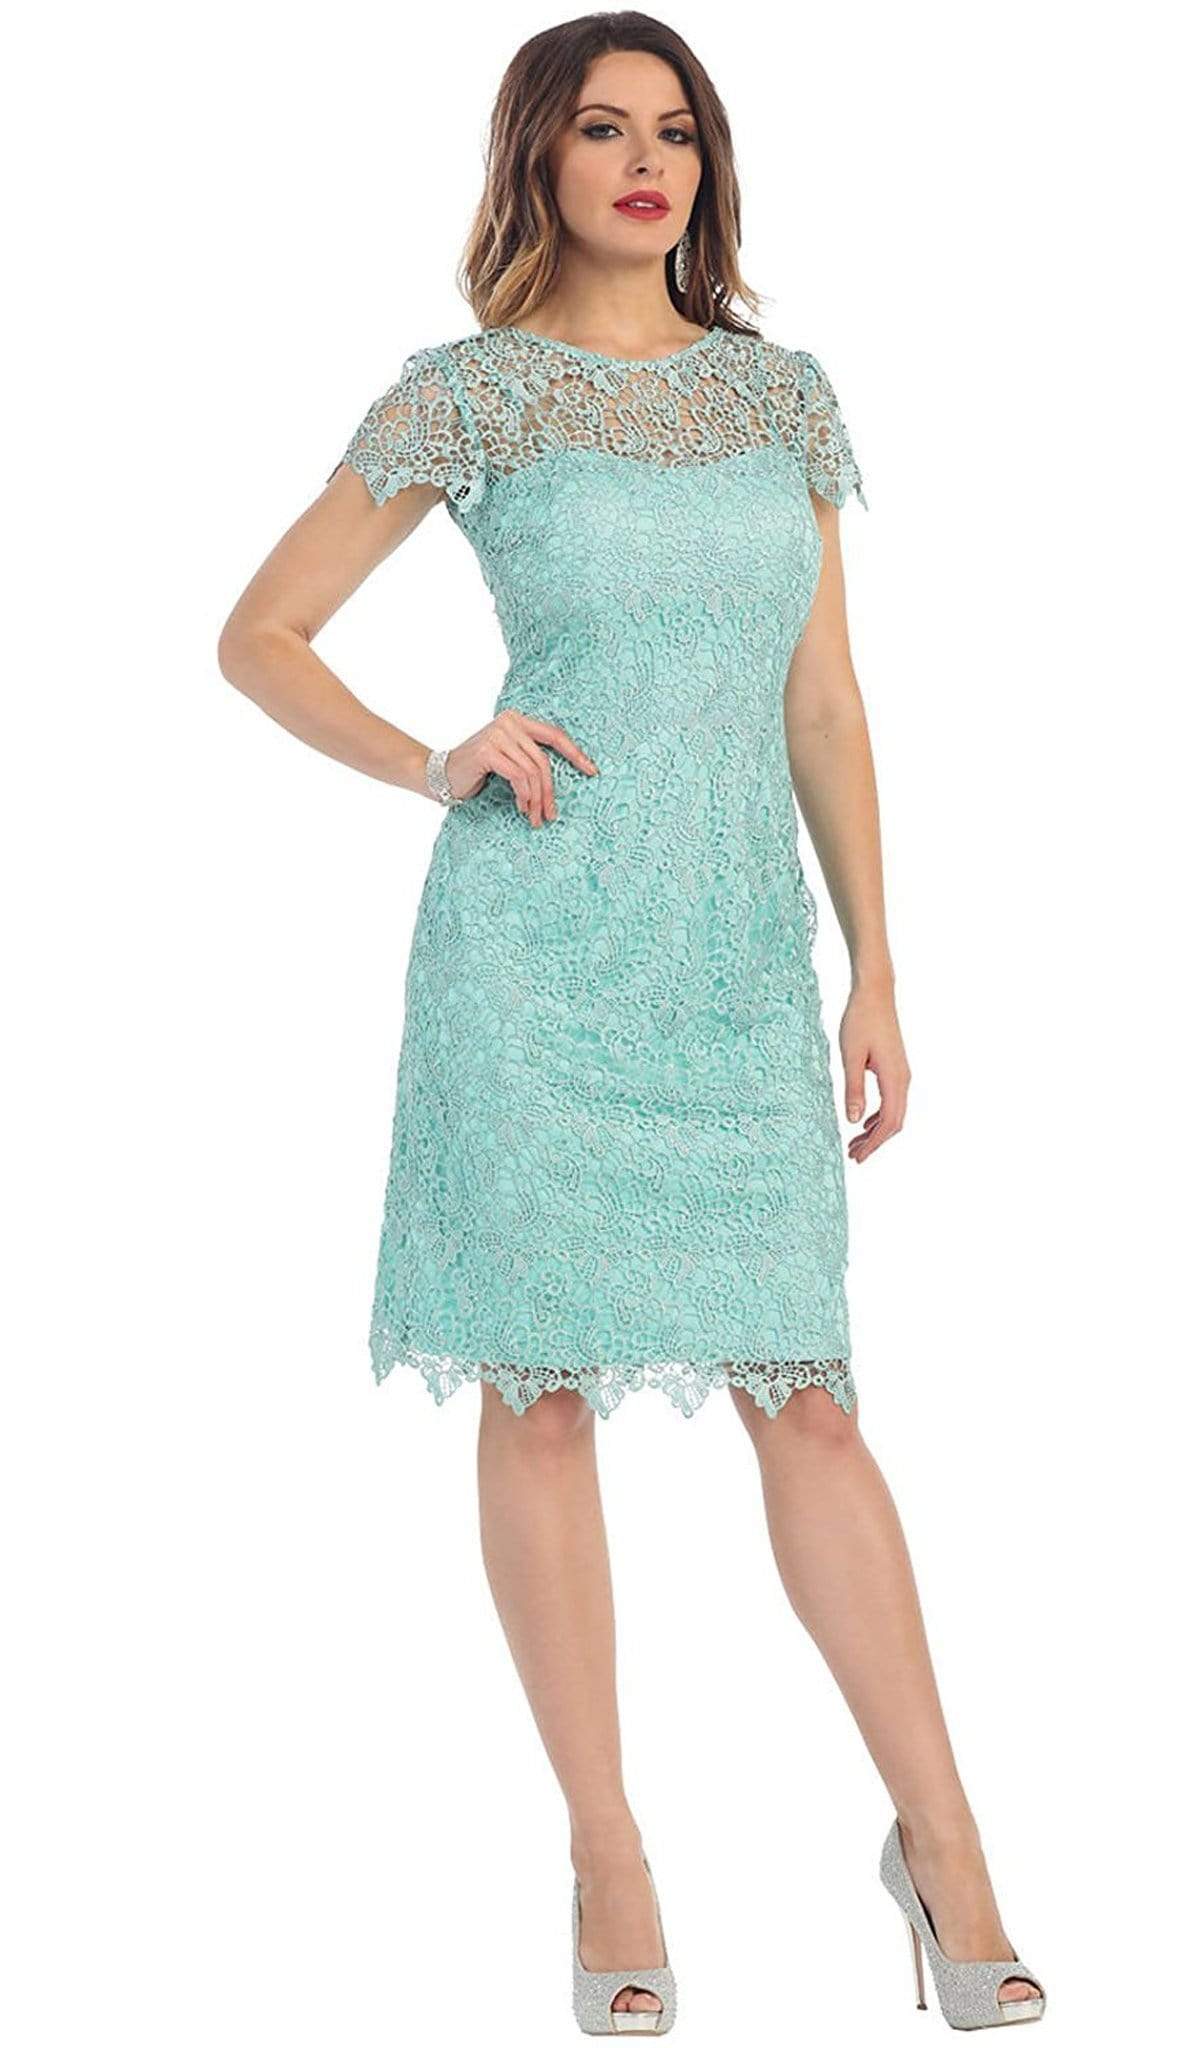 May Queen - Short Sleeve Illusion Lace Sheath Formal Dress Special Occasion Dress M / Aqua